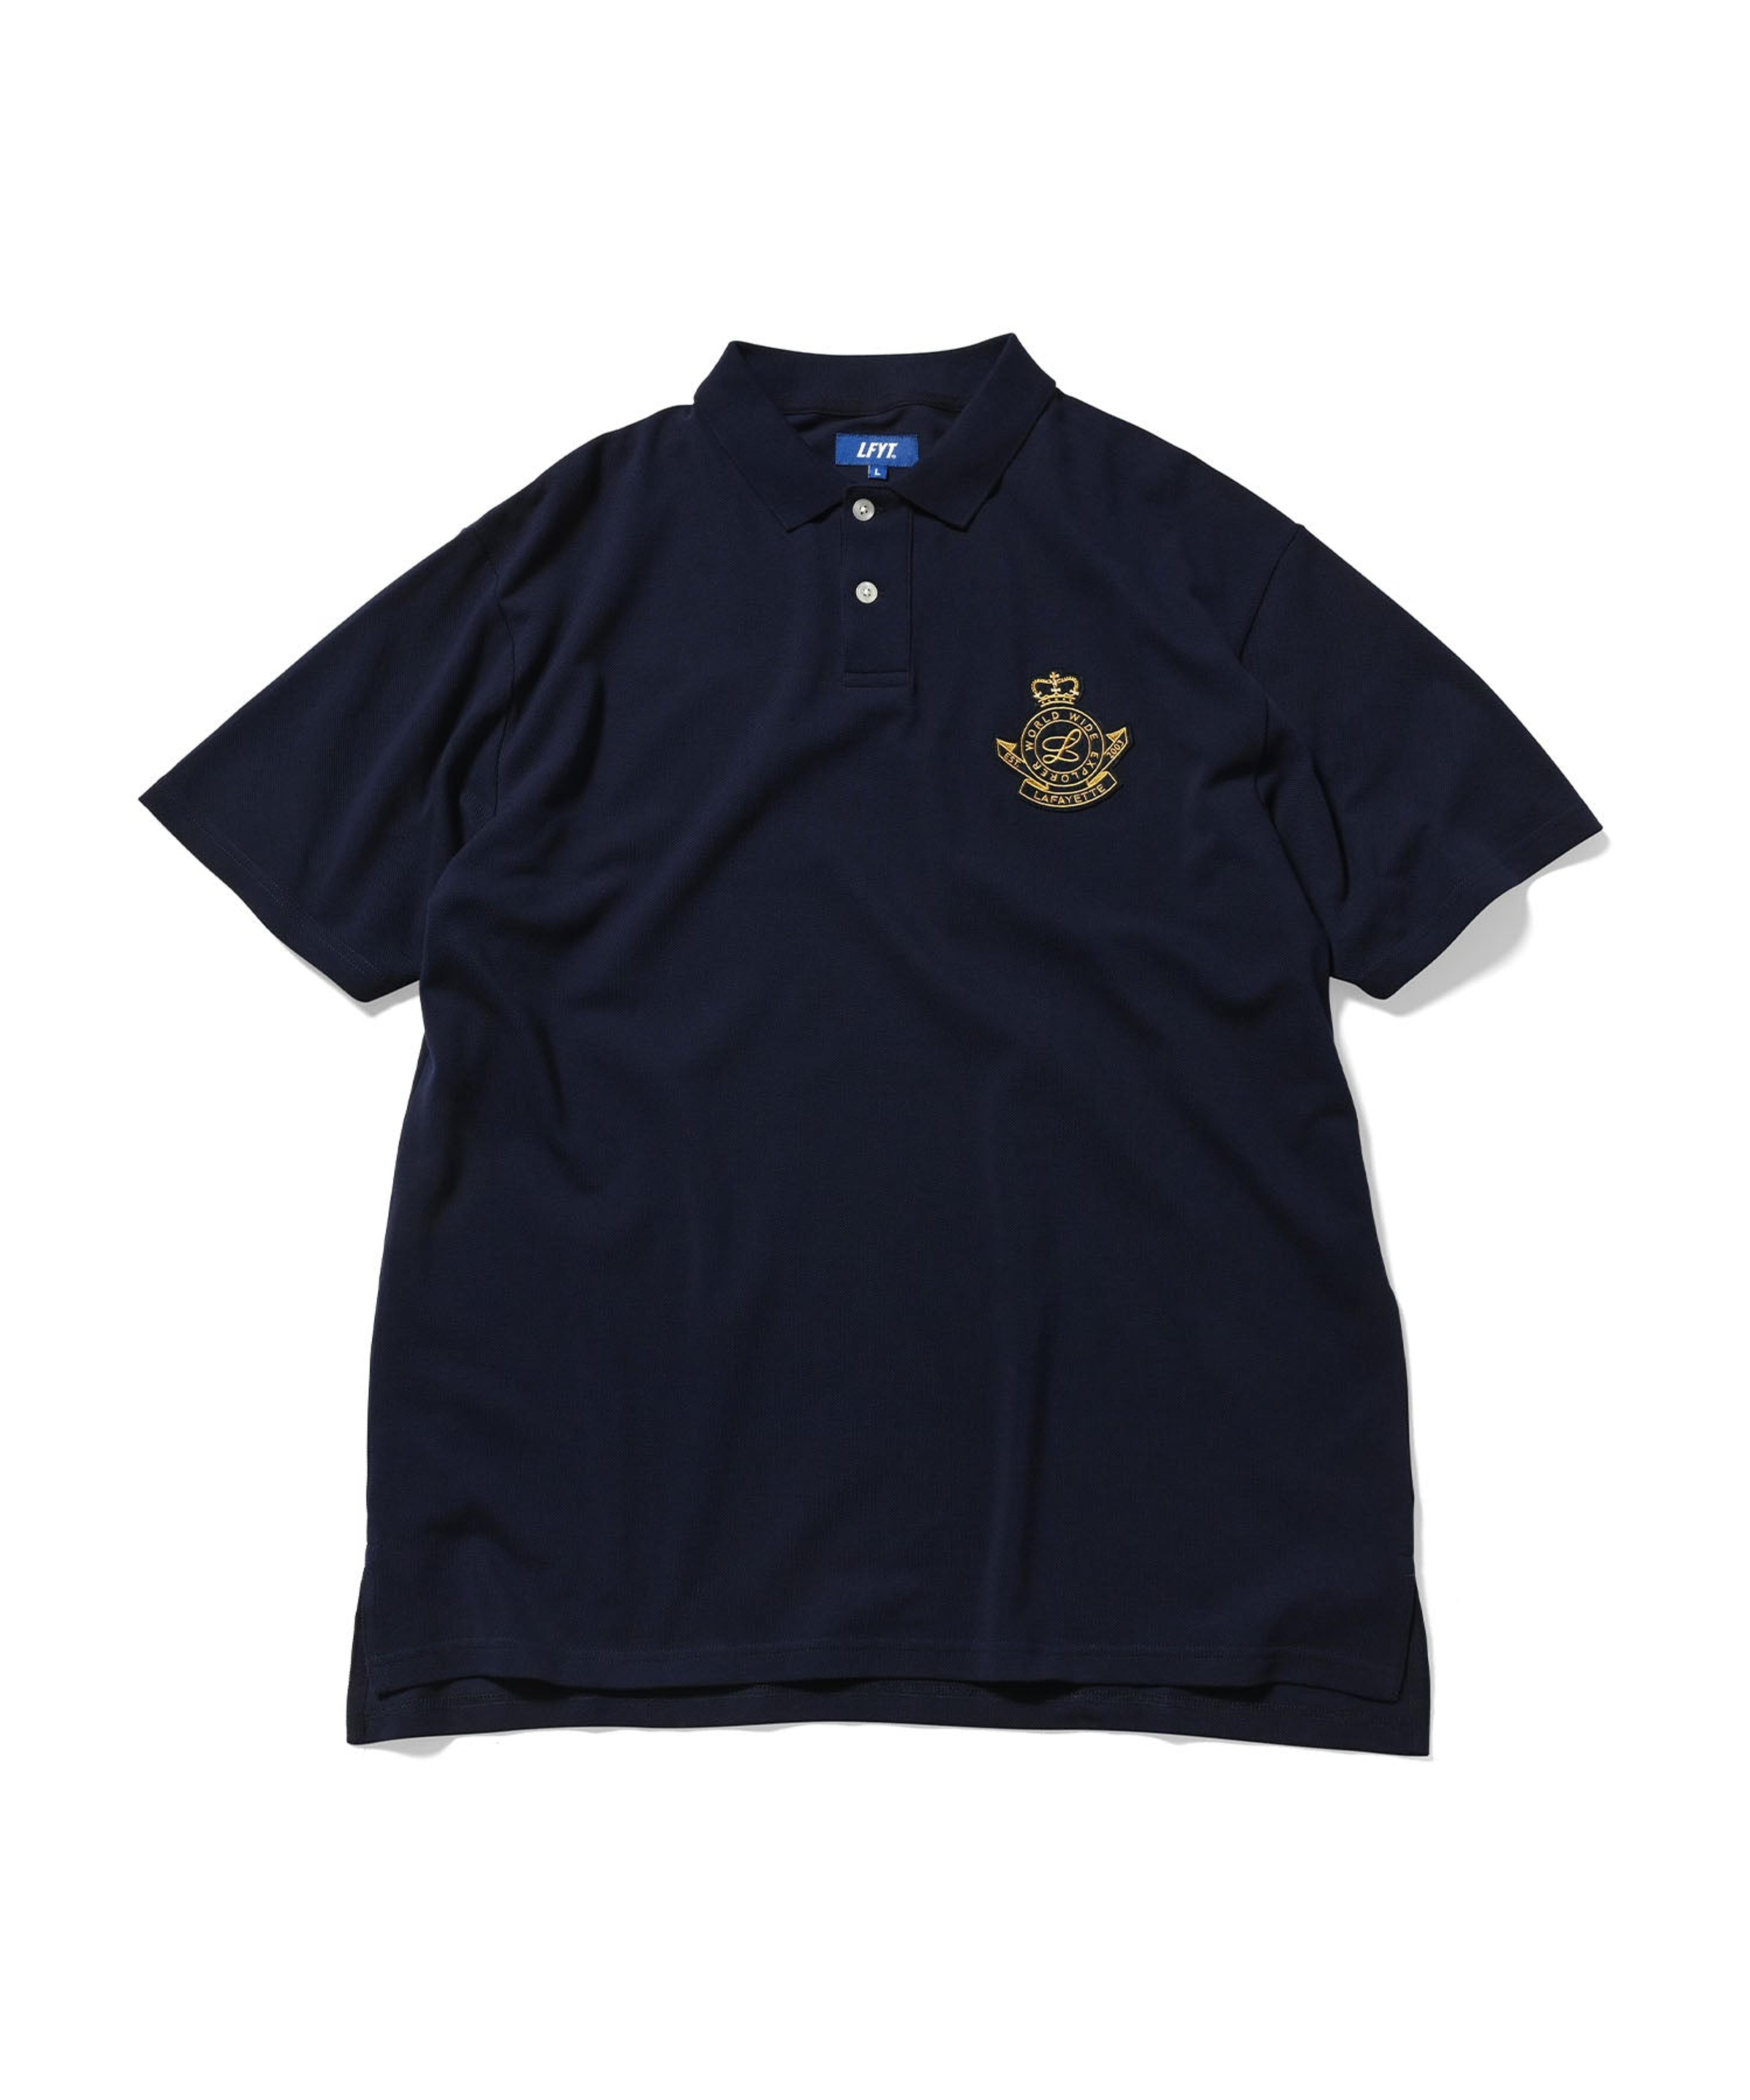 Alternate View 3 of LFYT - COLLEGE COLOR BIG POLO LS240301